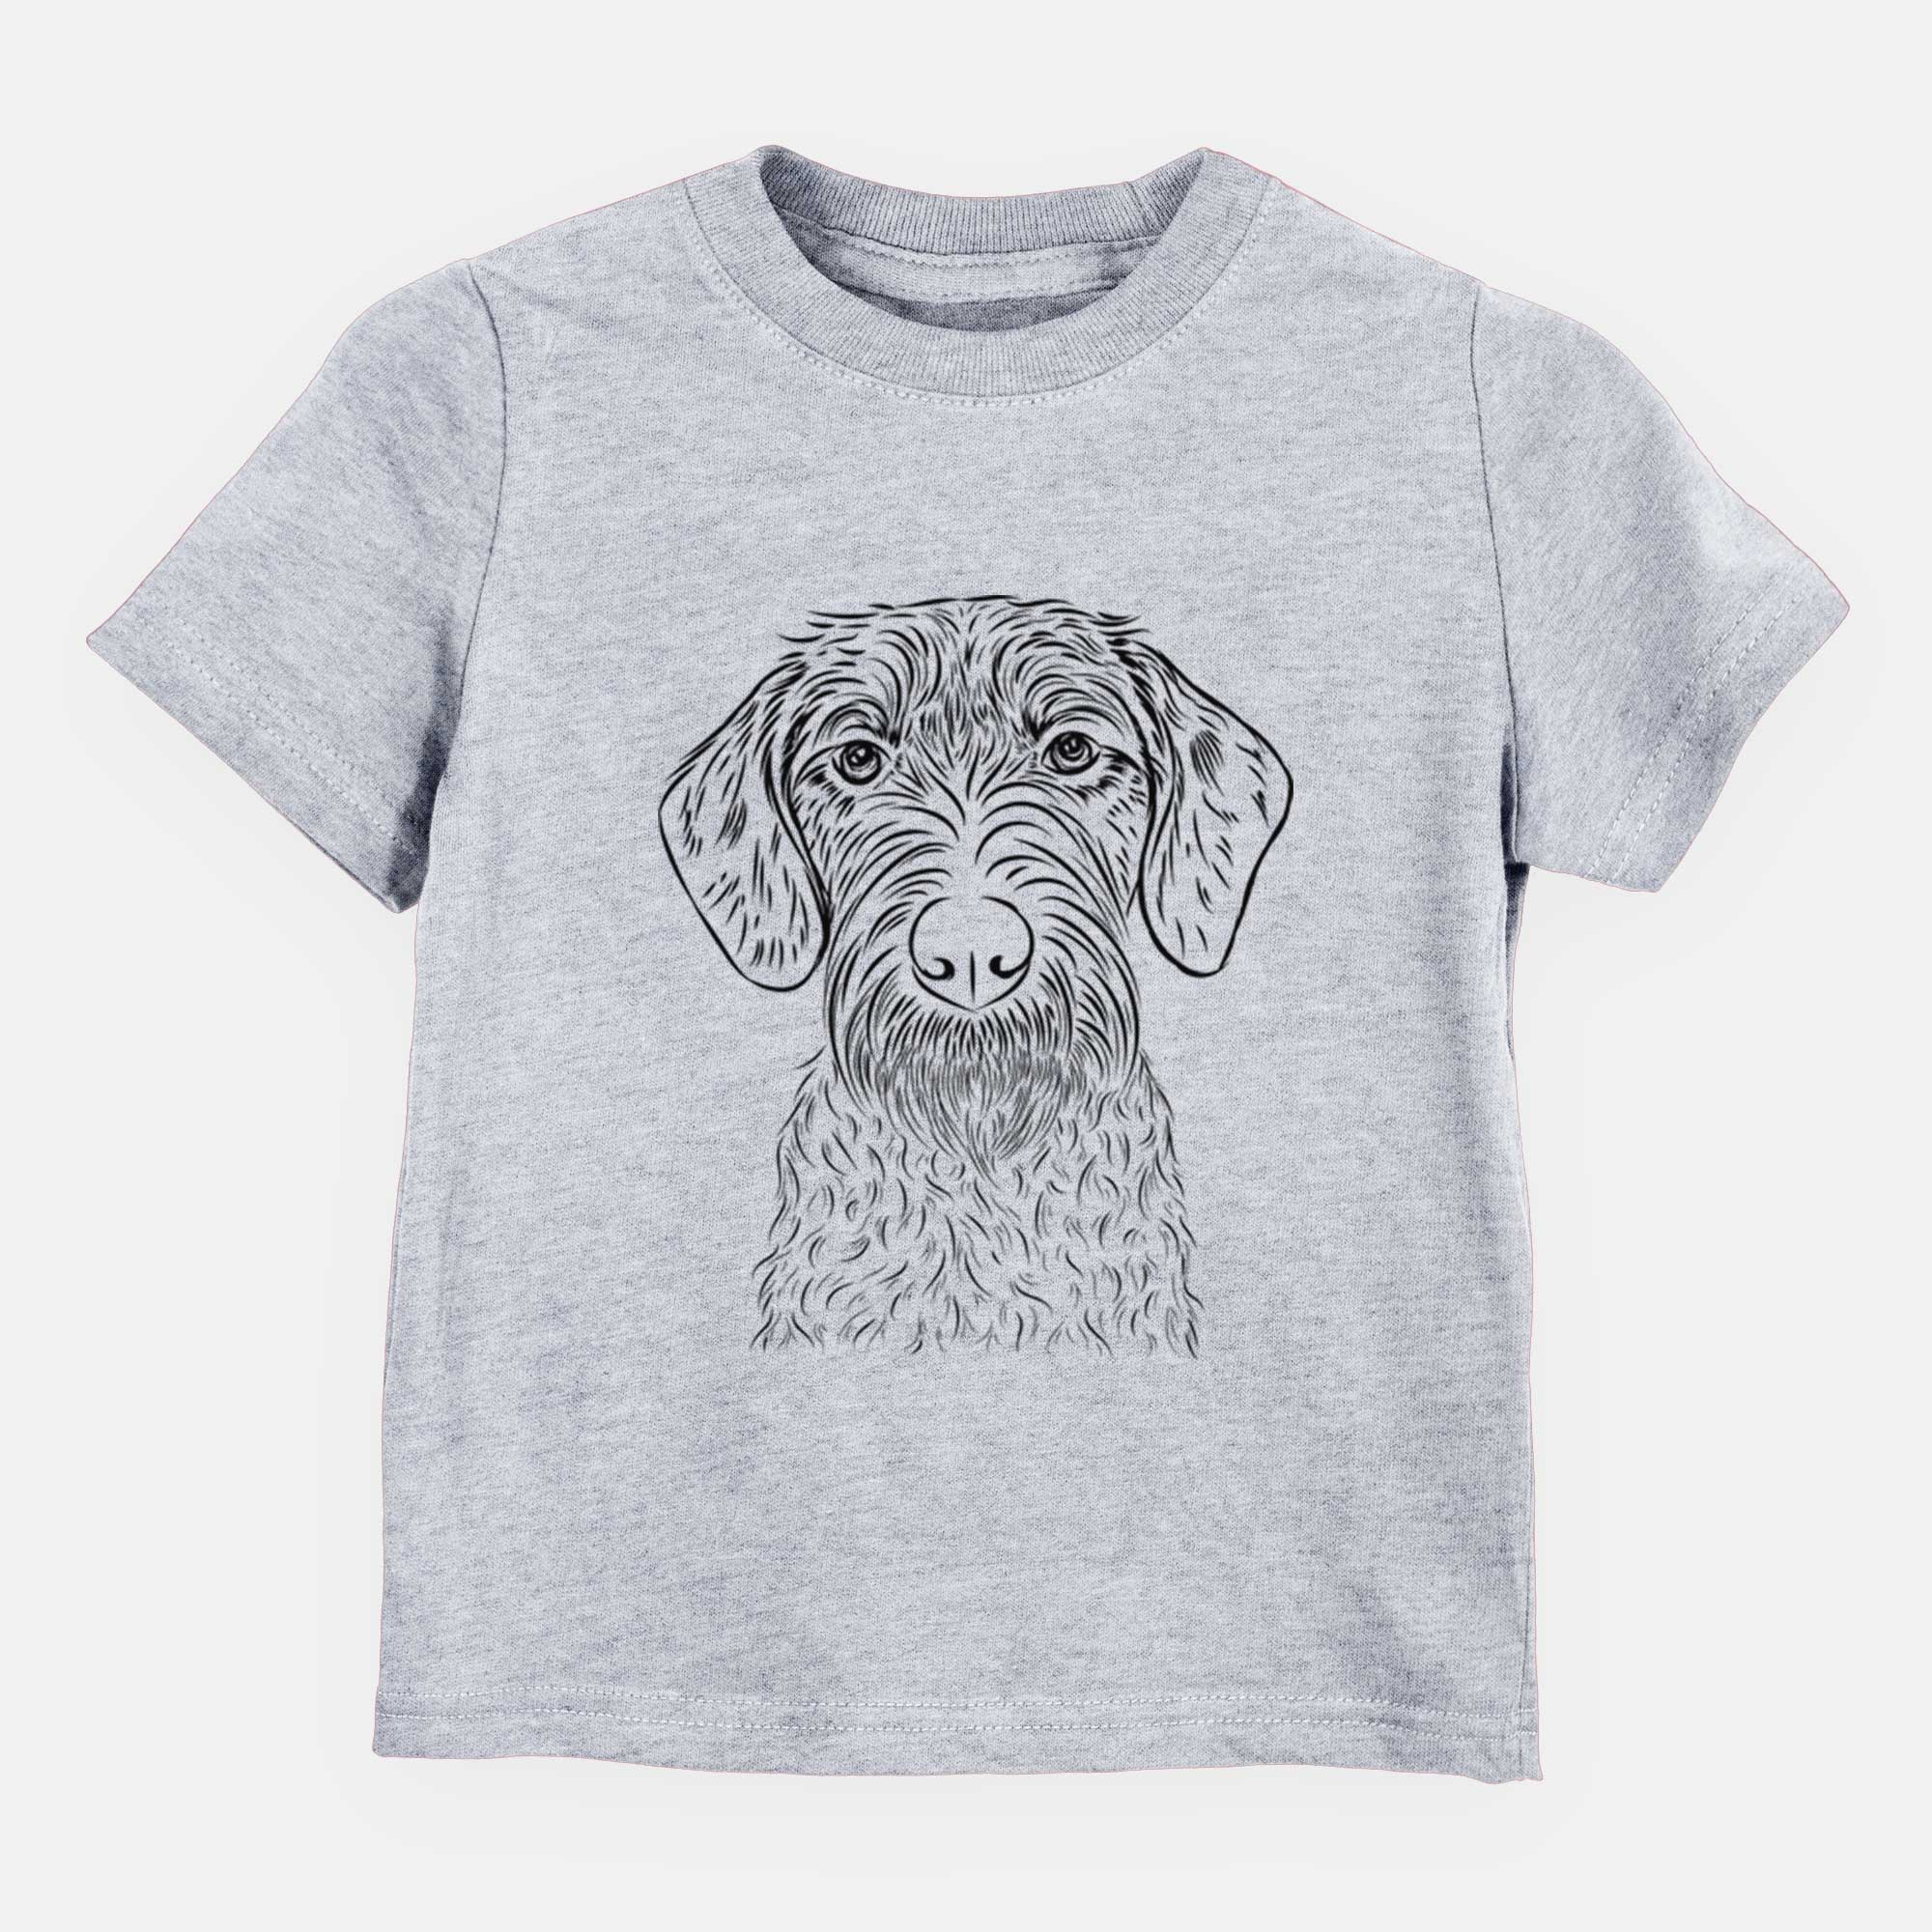 Bare Gus the German Wirehaired Pointer - Kids/Youth/Toddler Shirt